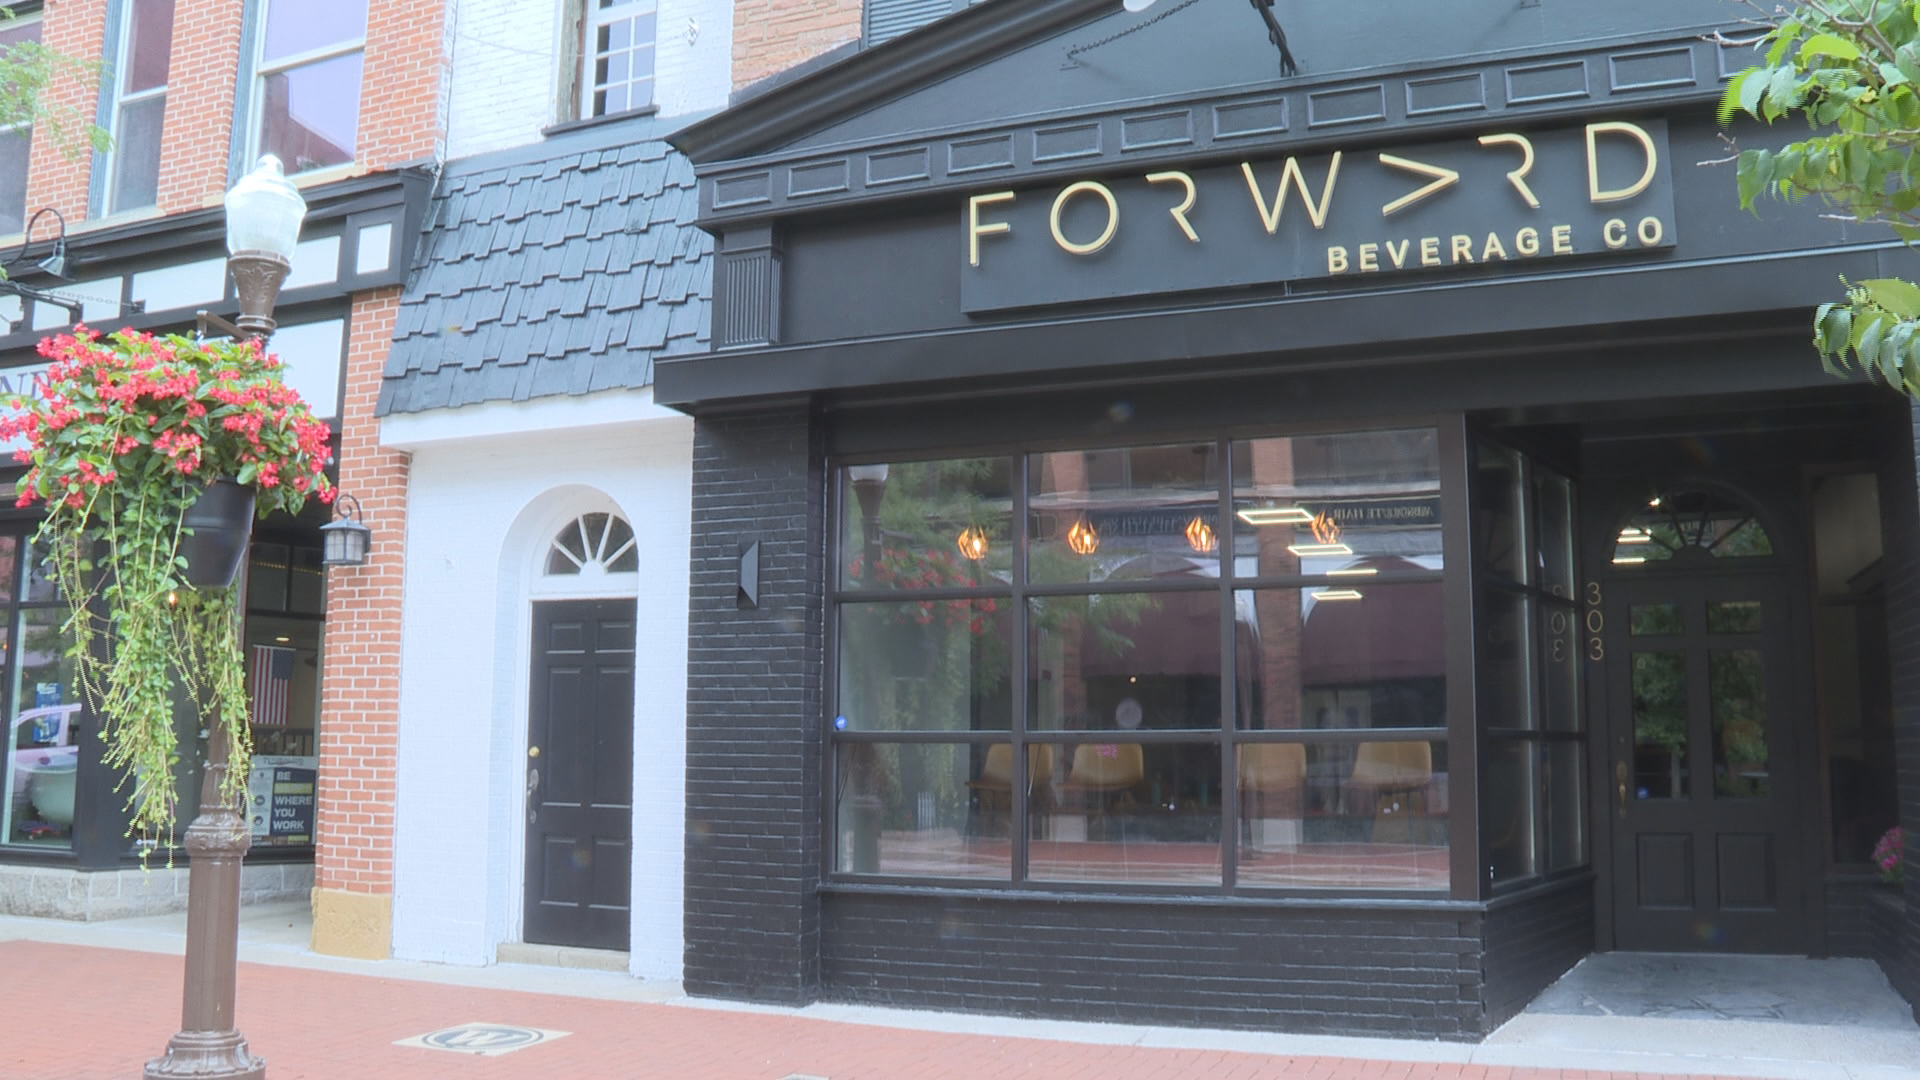 Business of the Week: Forward Beverage Co. - Wausau Pilot & Review